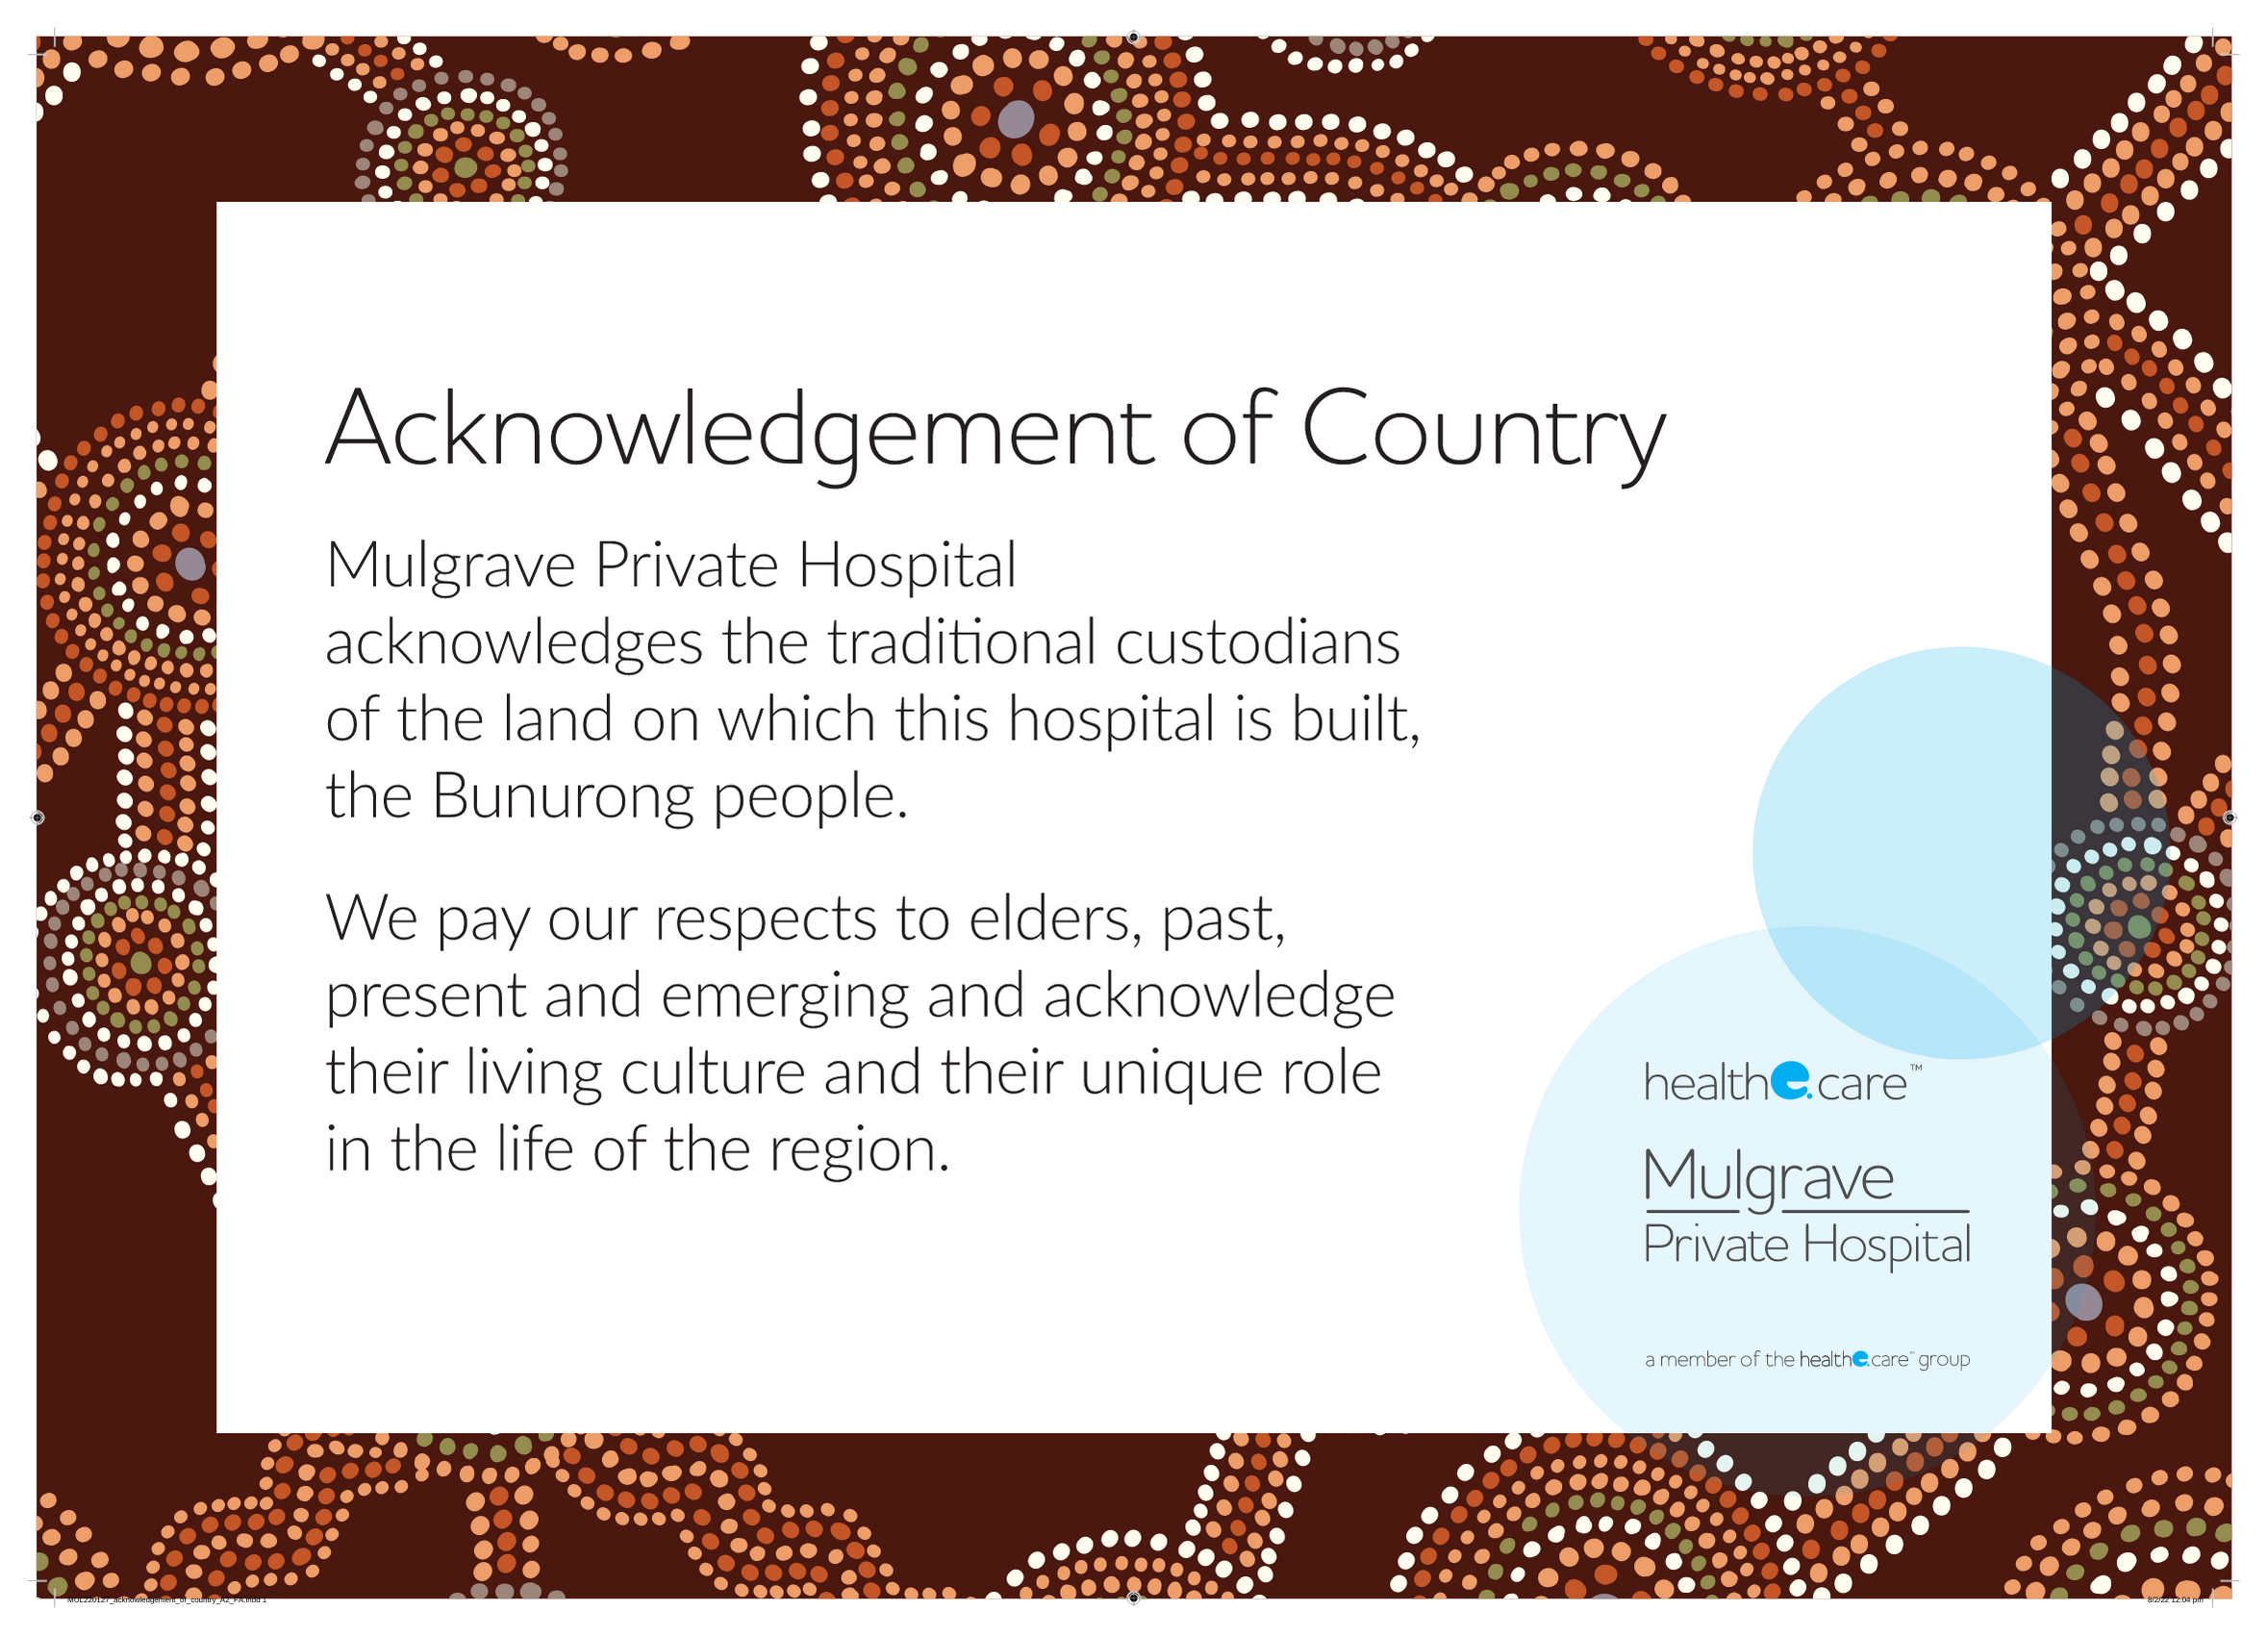 MUL220127_acknowledgement_of_country_A2_FA-2.pdf.png#asset:4884